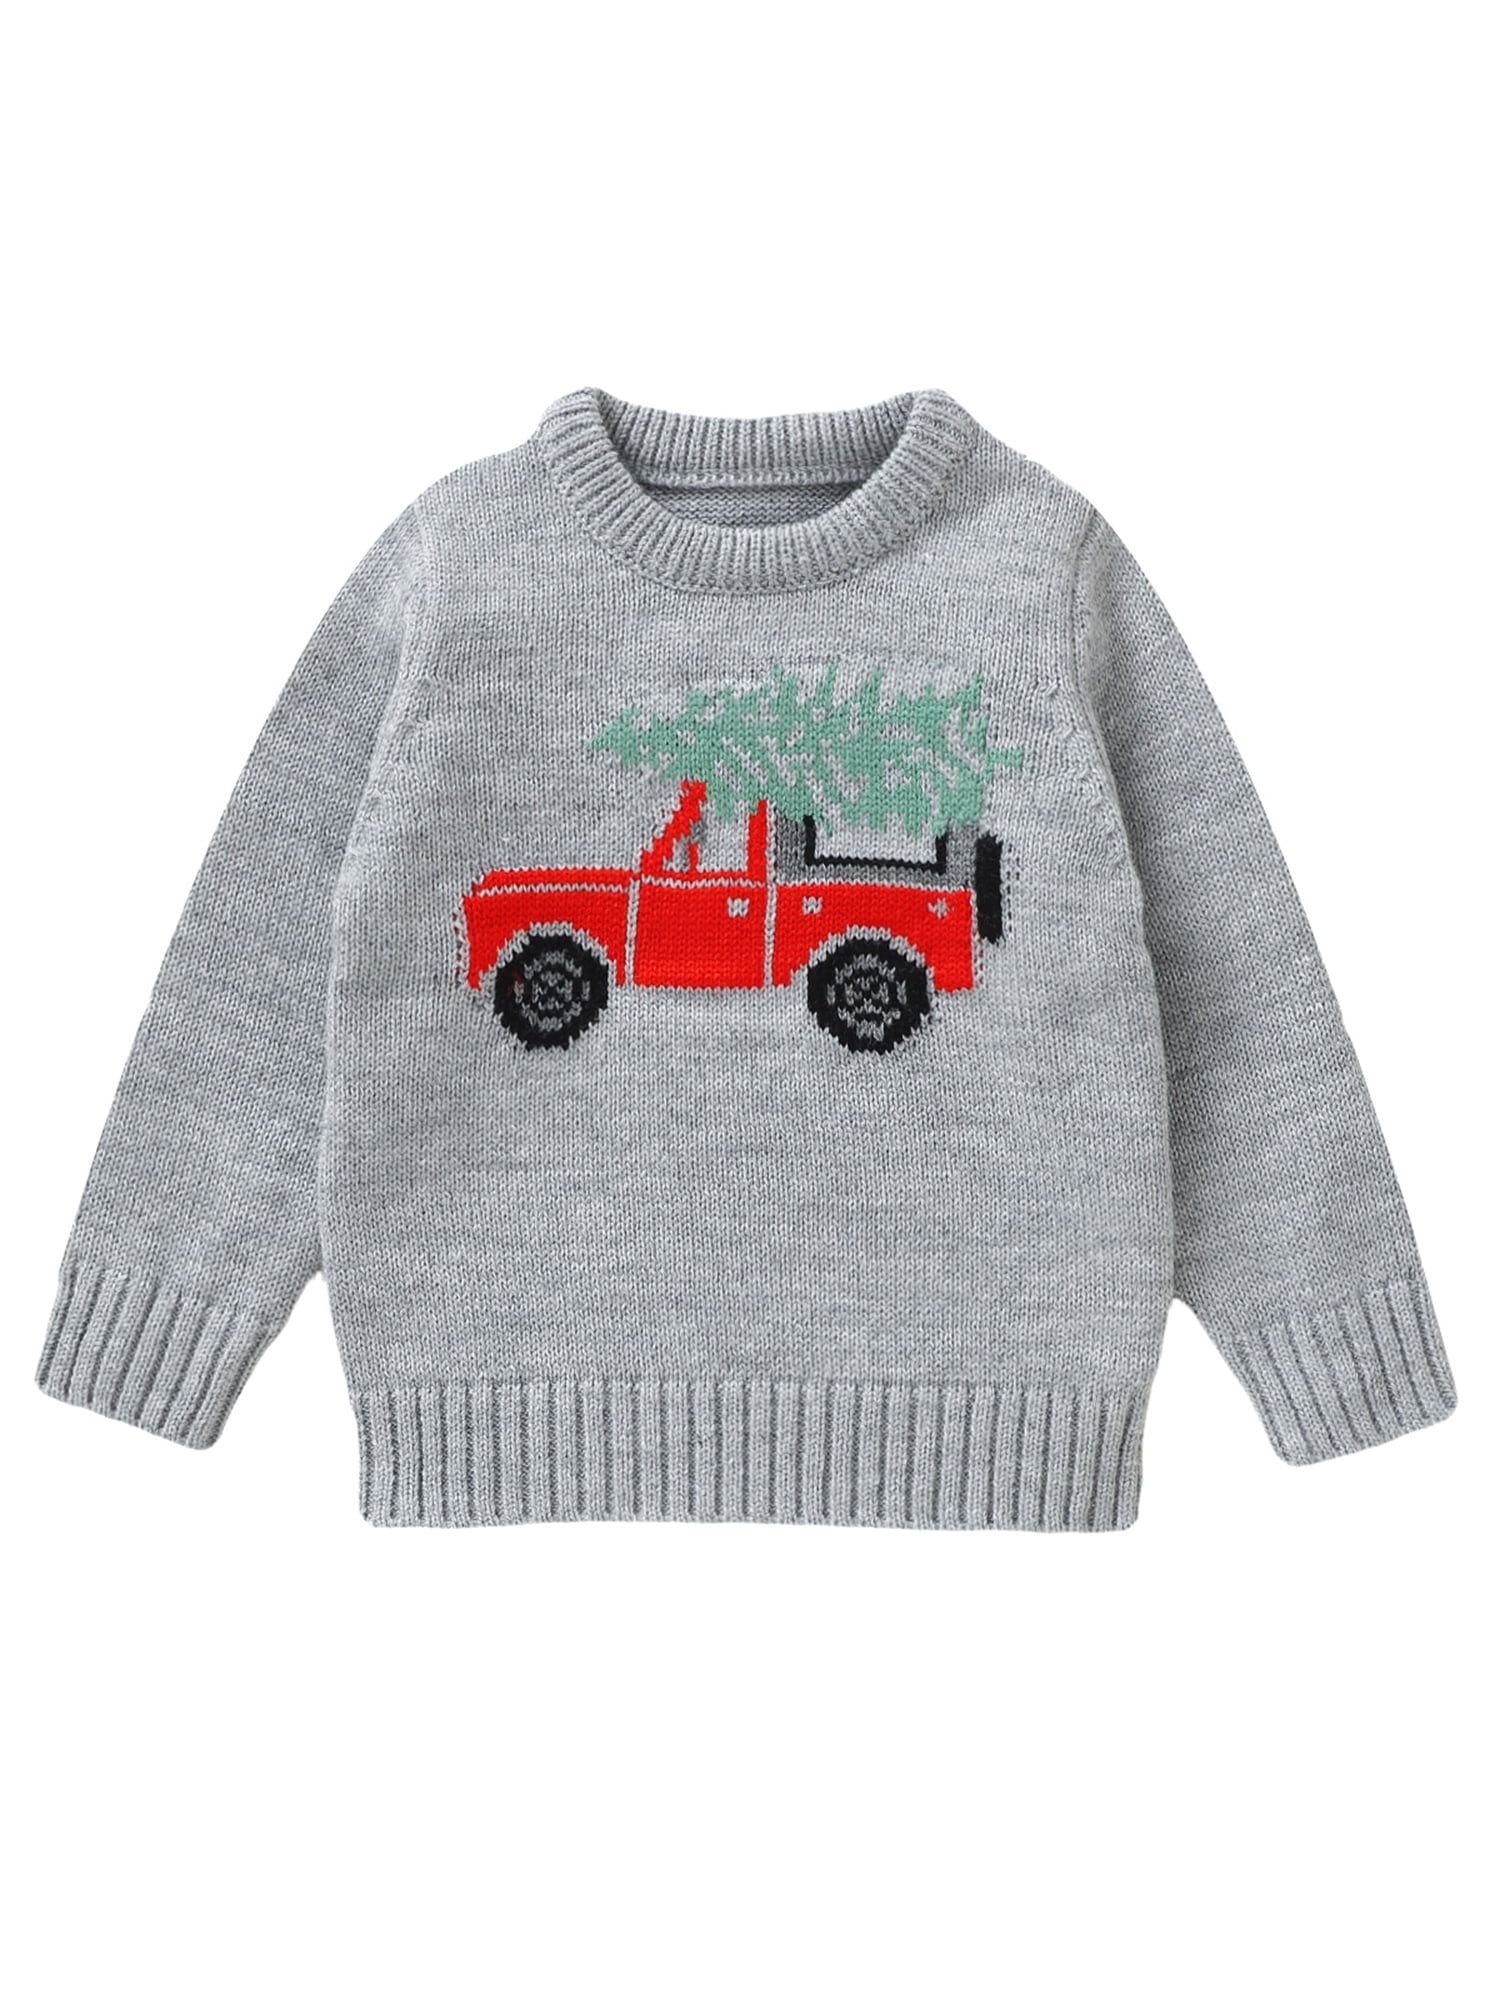 GXFC Baby Boys Girls Christmas Sweaters Toddler Red Truck Print Special Christmas Holiday Sweater... | Walmart (US)